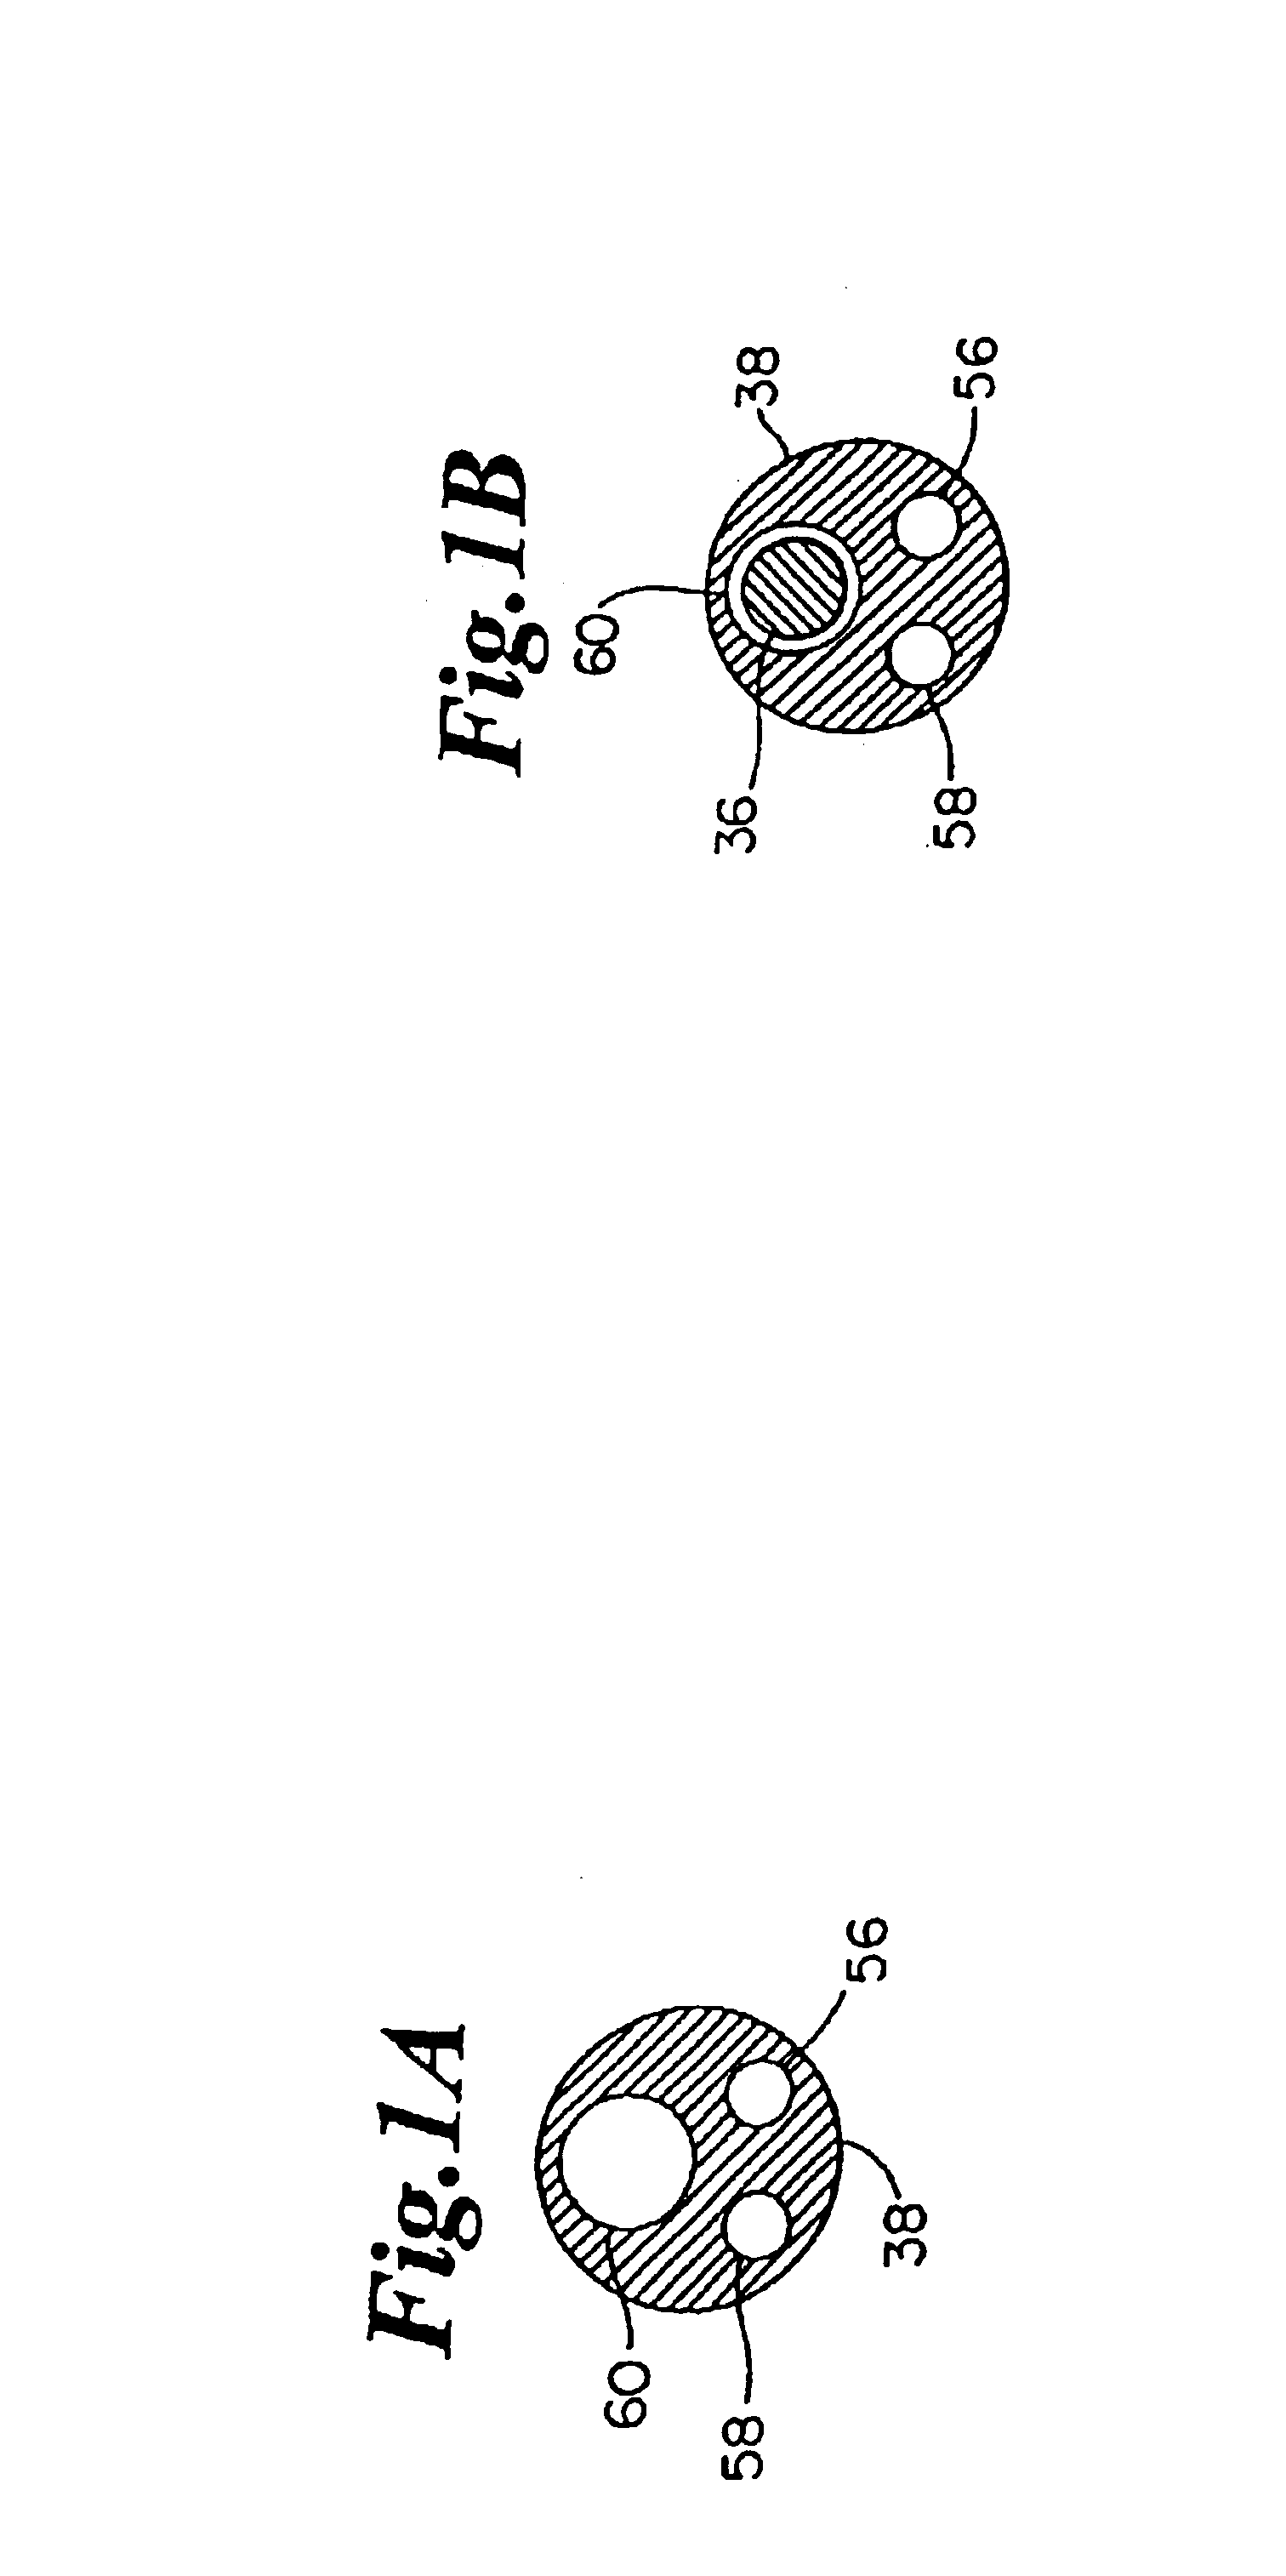 Guide wire insertion and re-insertion tools and methods of use